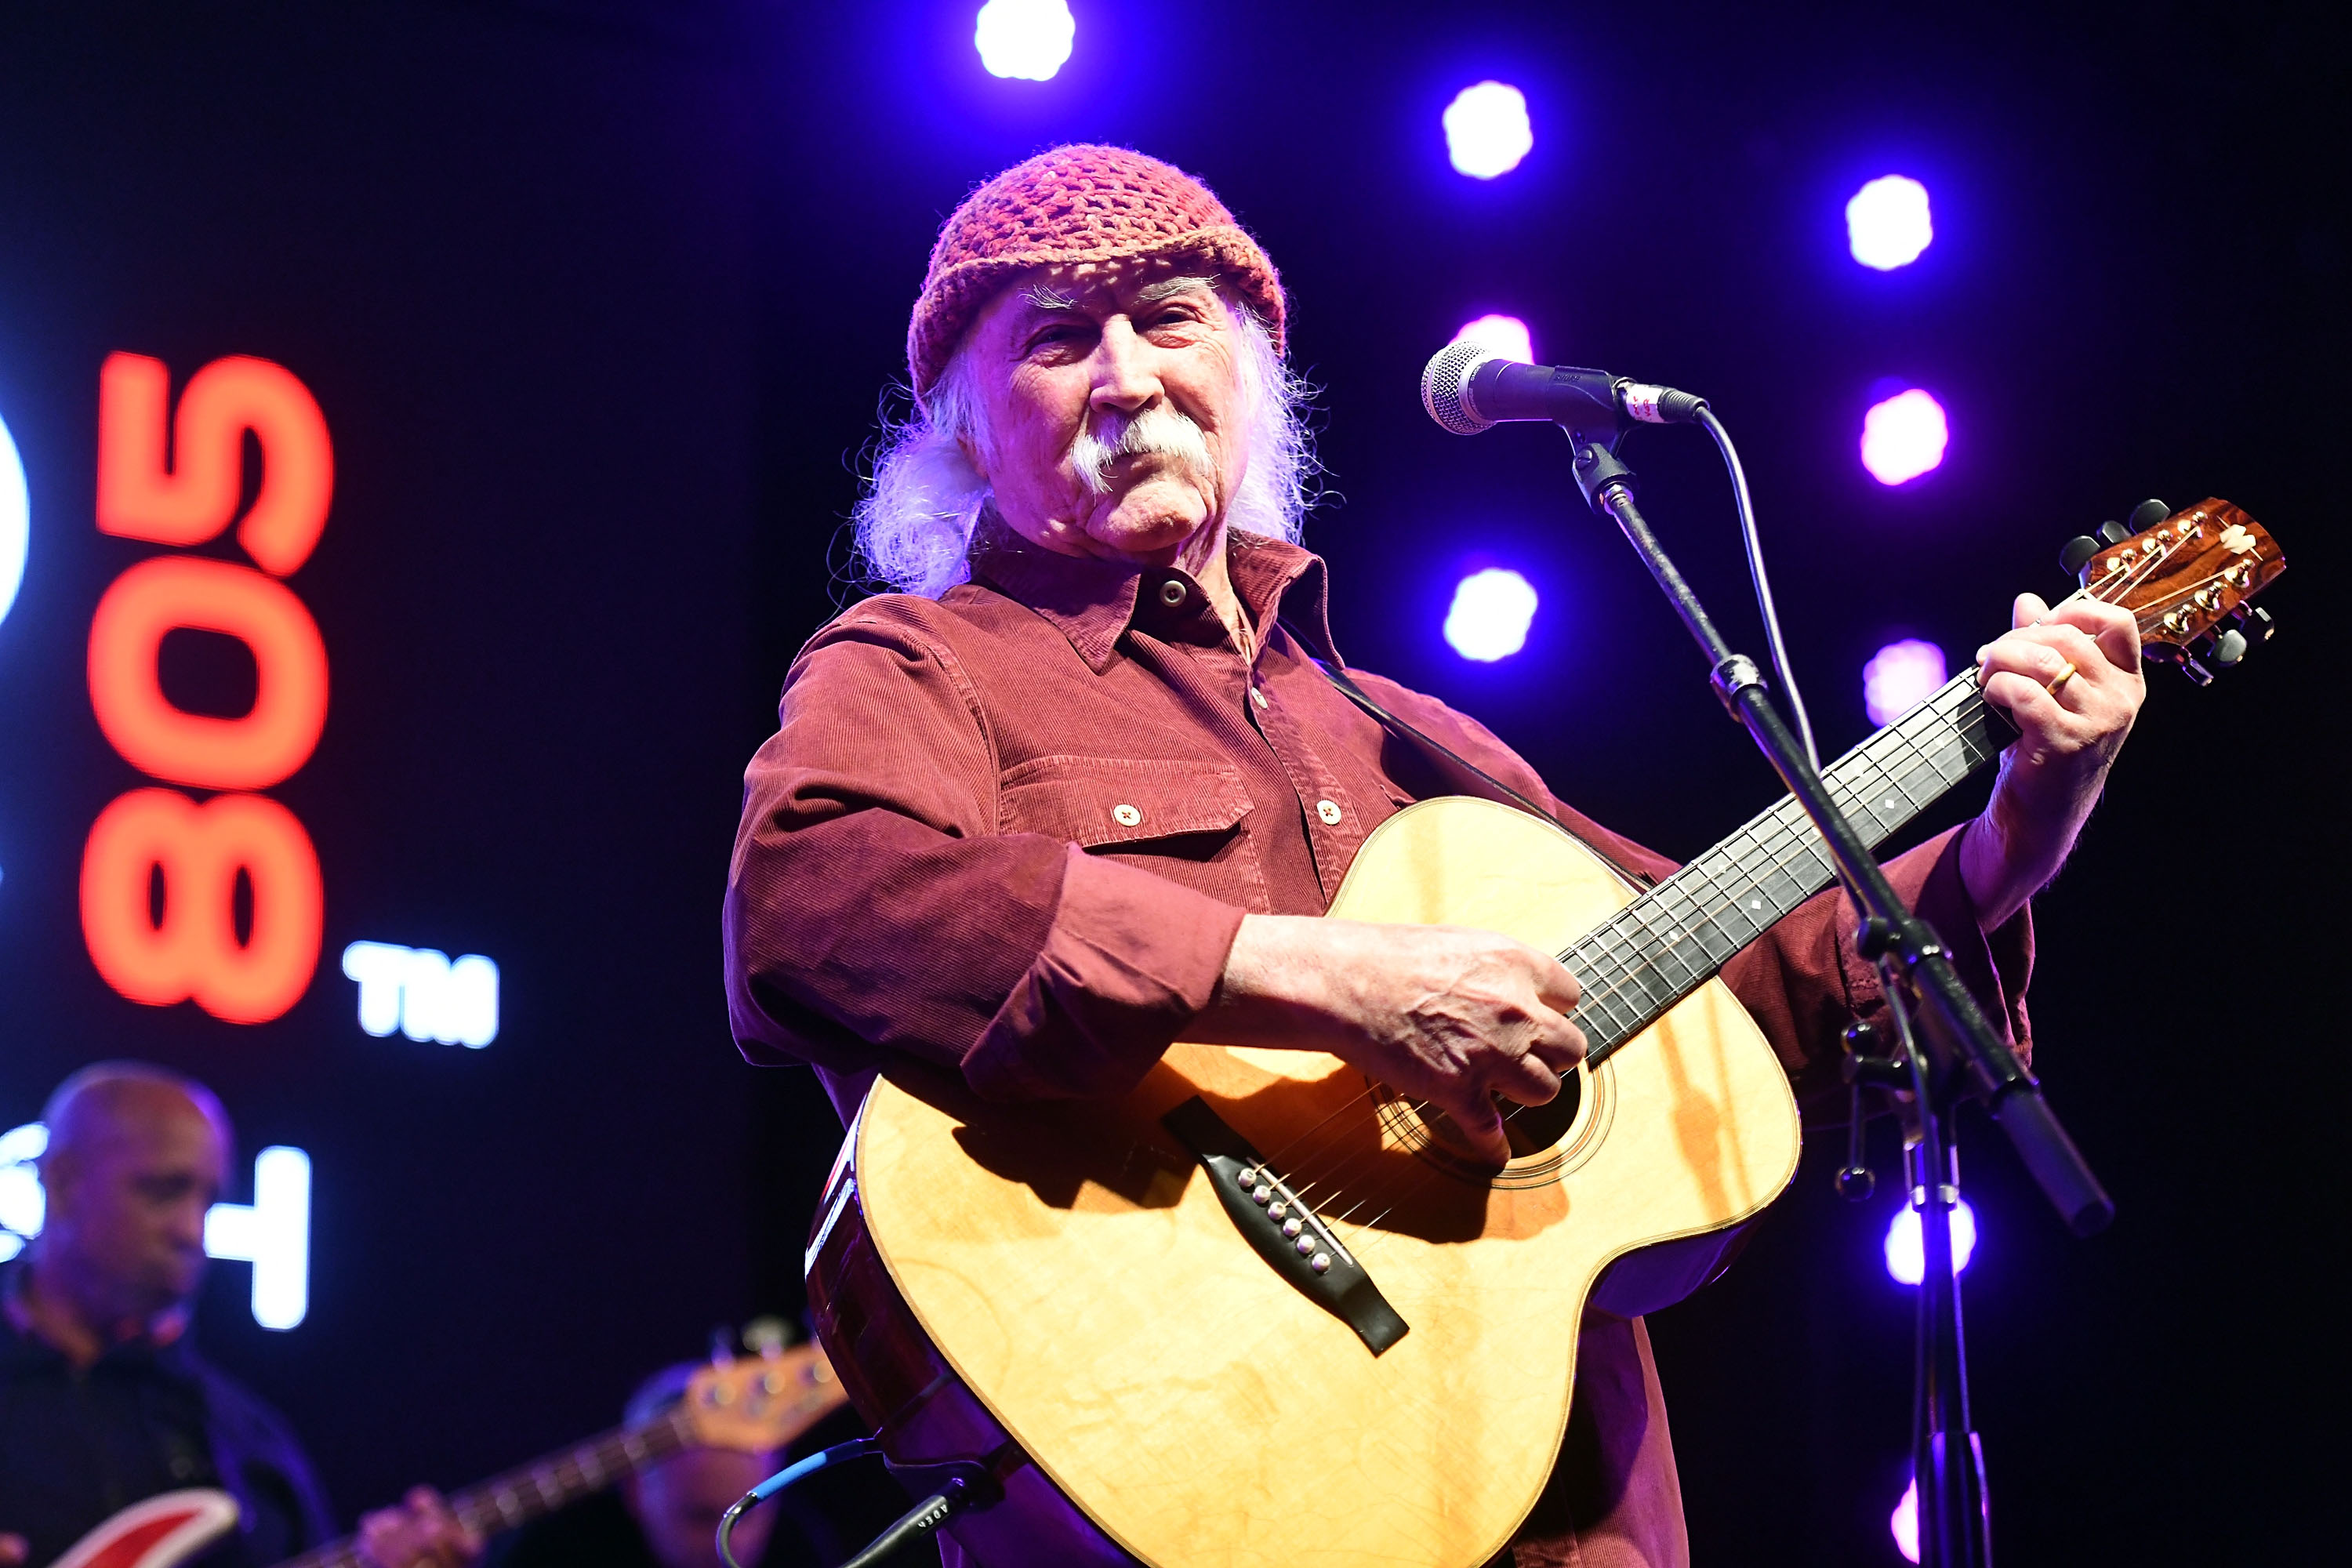 Rock and Roll Hall of Fame member David Crosby died at the age of 81